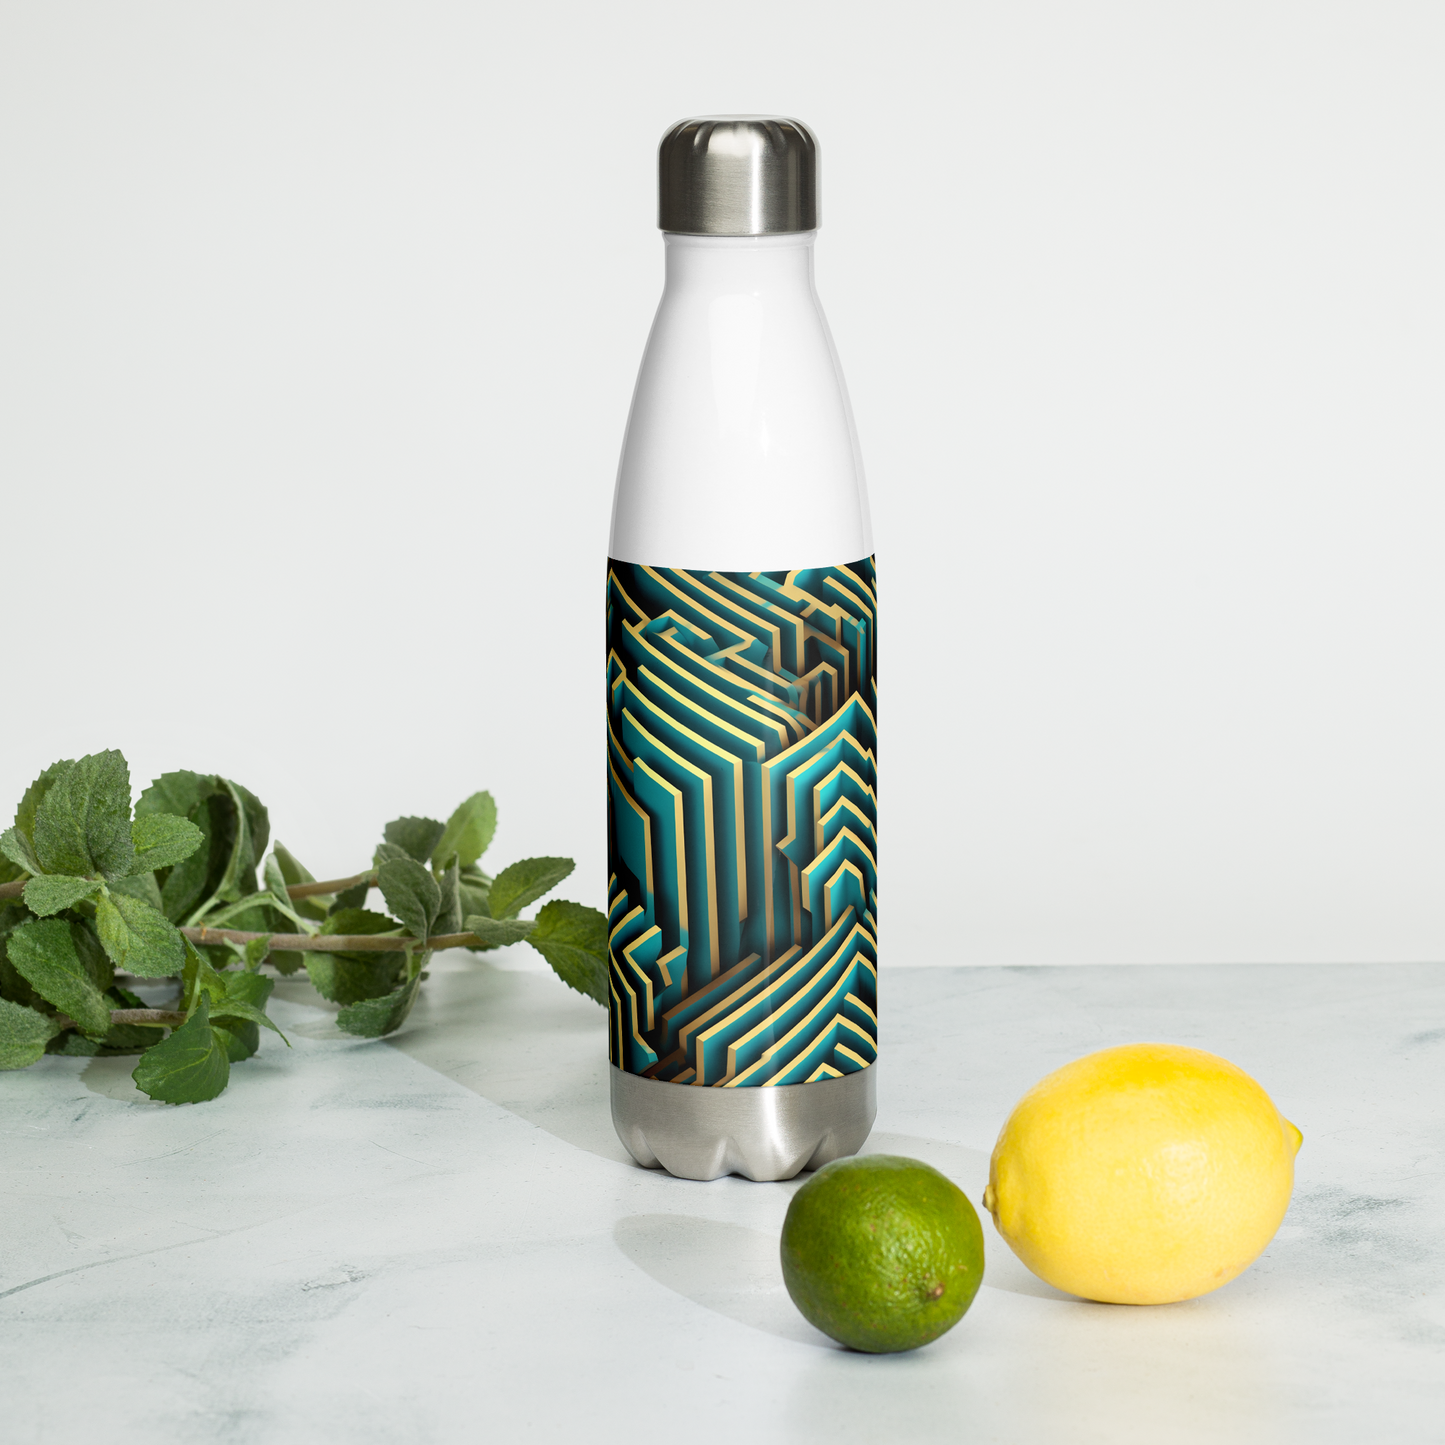 3D Maze Illusion | 3D Patterns | Stainless Steel Water Bottle - #5